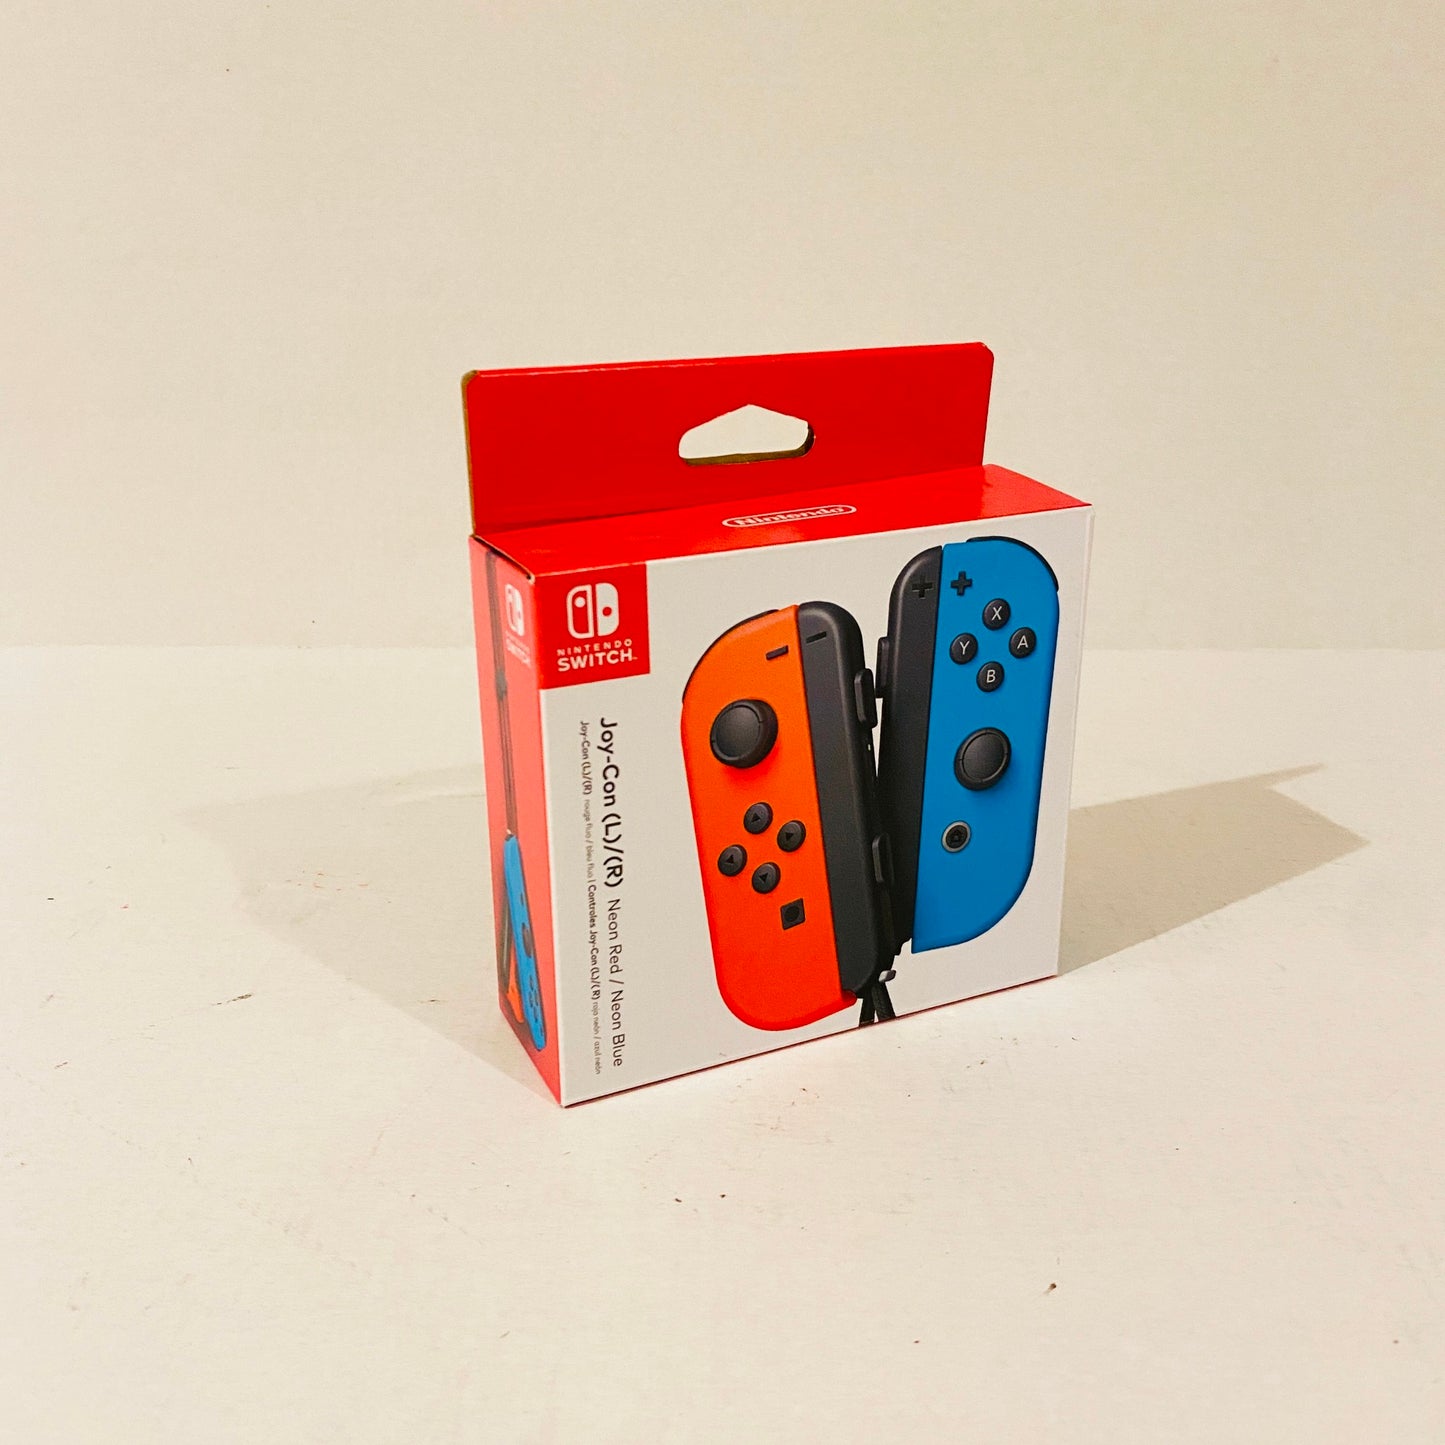 Nintendo Switch Left and Right JoyCons Controllers - Neon Red/Neon Blue